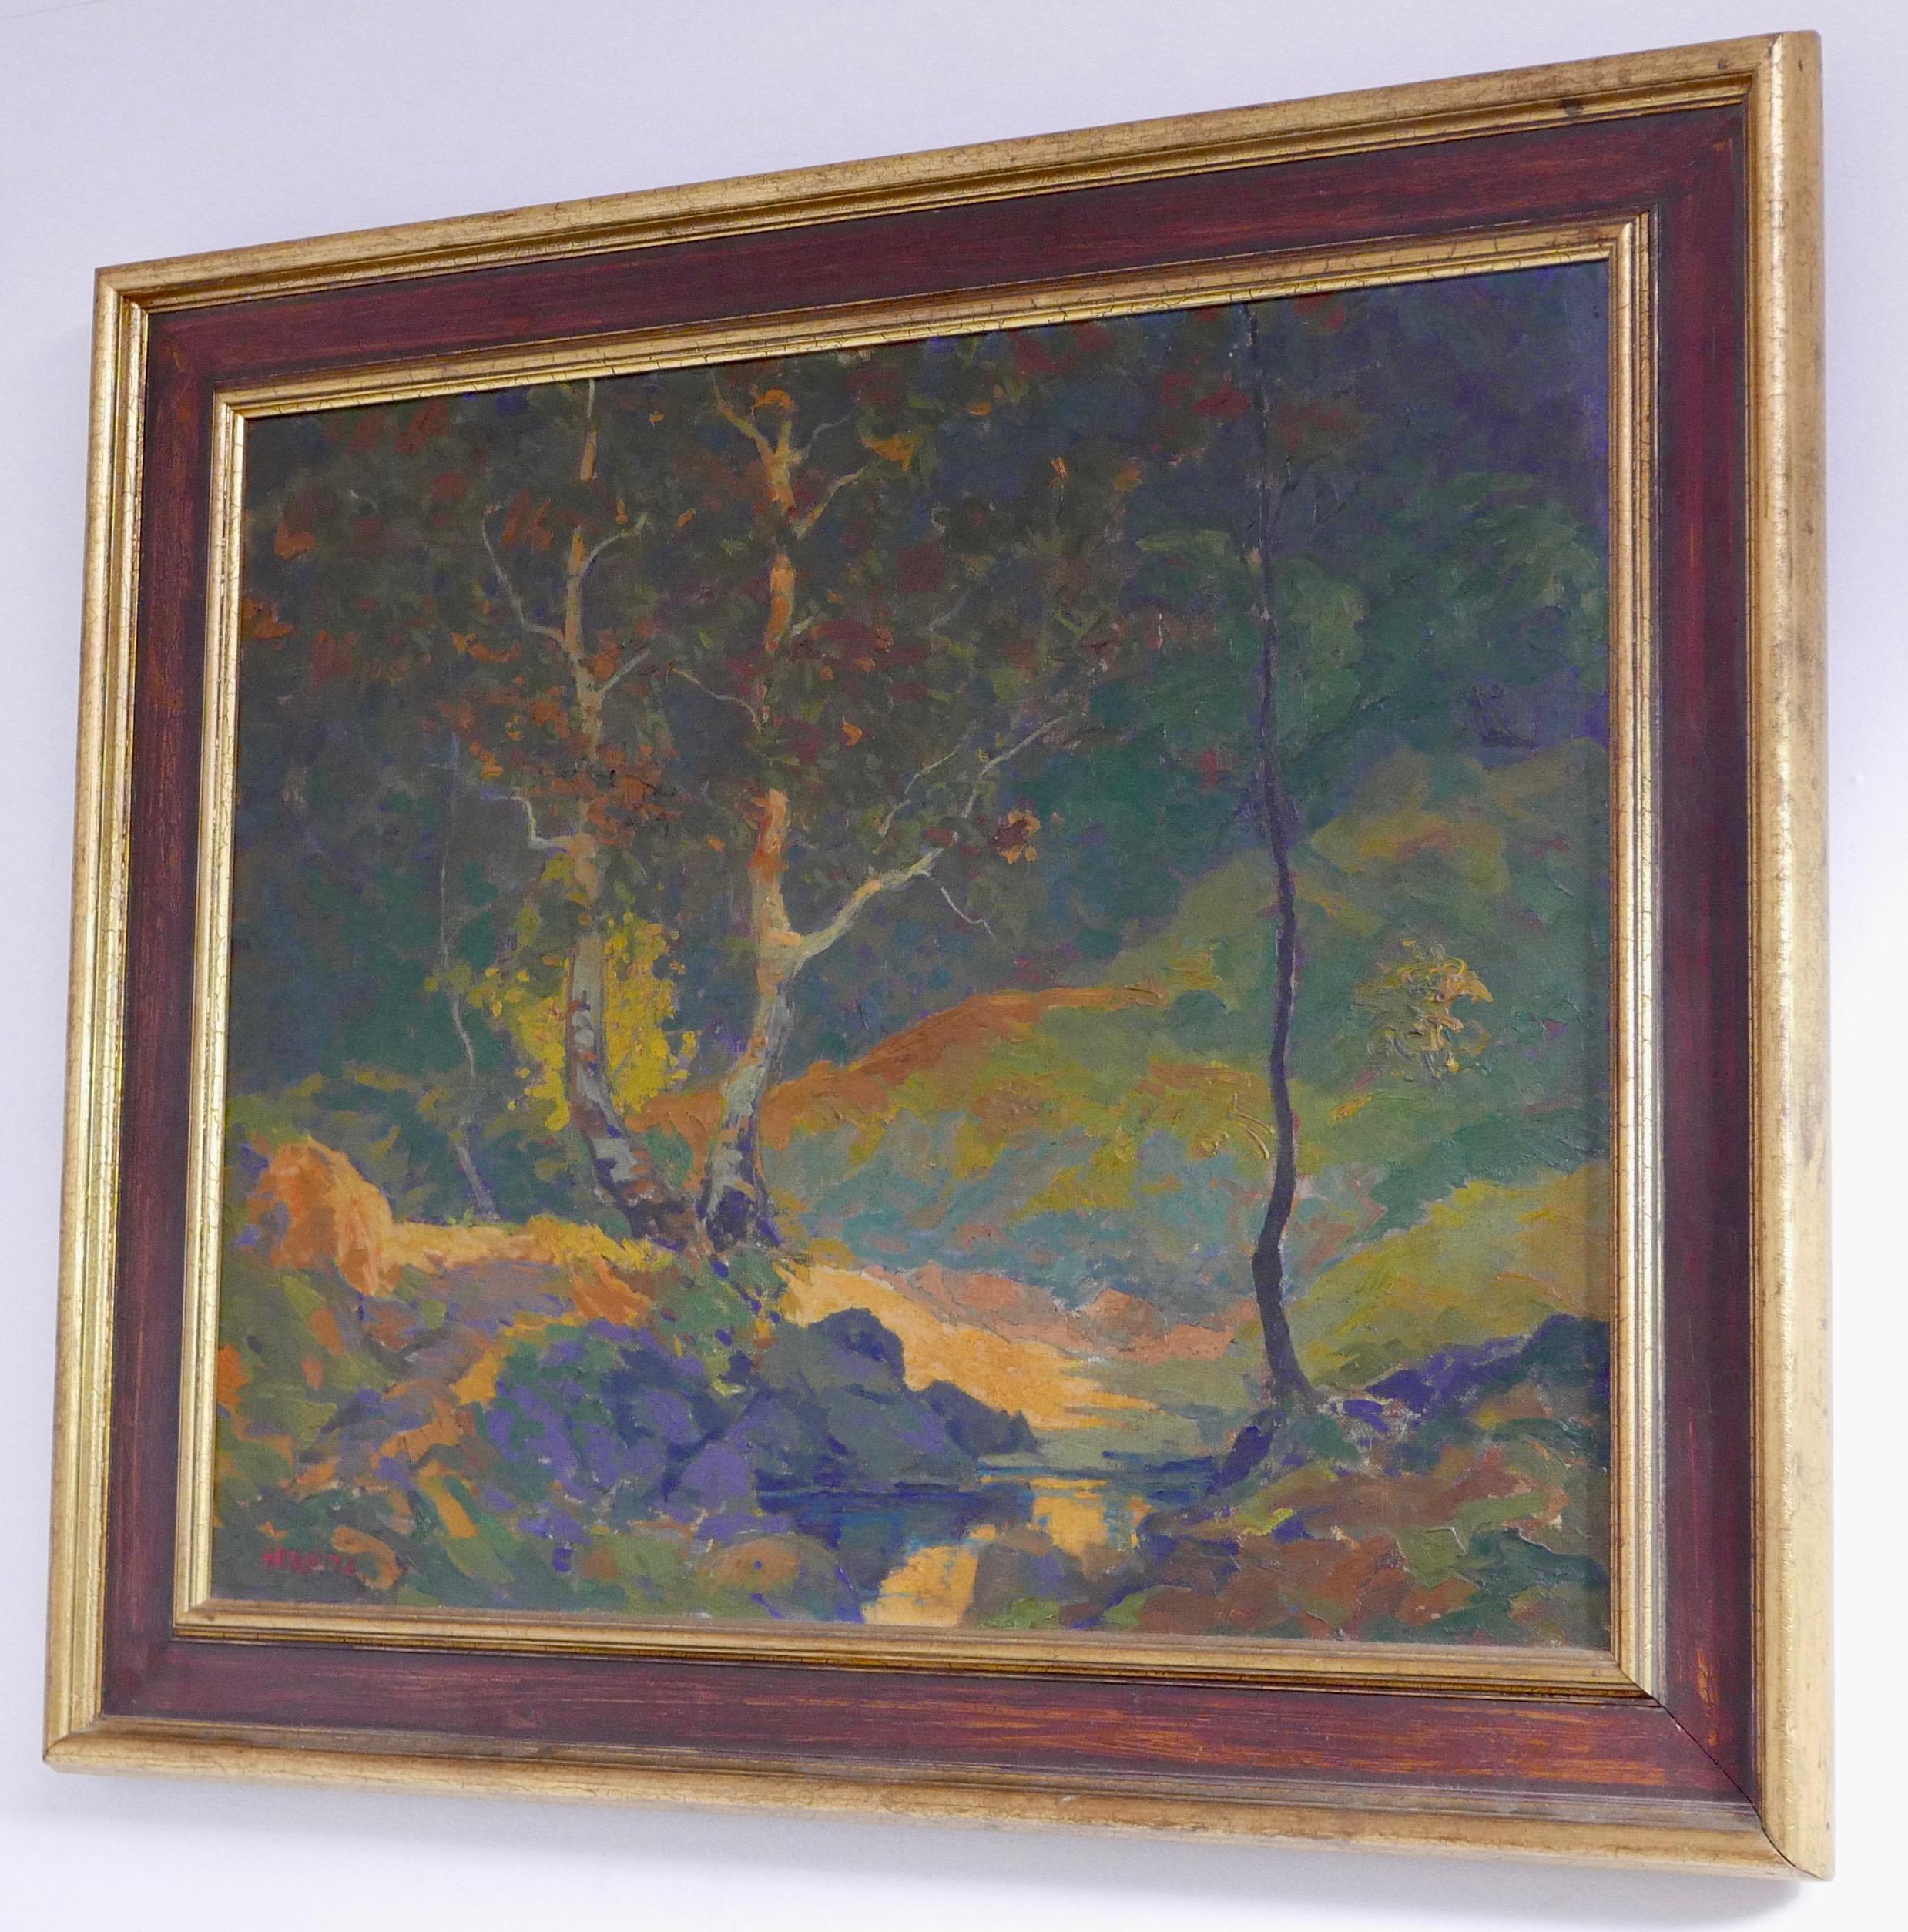 Abstract/ Impressionist Landscape by Russian/American William N. Horwitz, c 1924 8